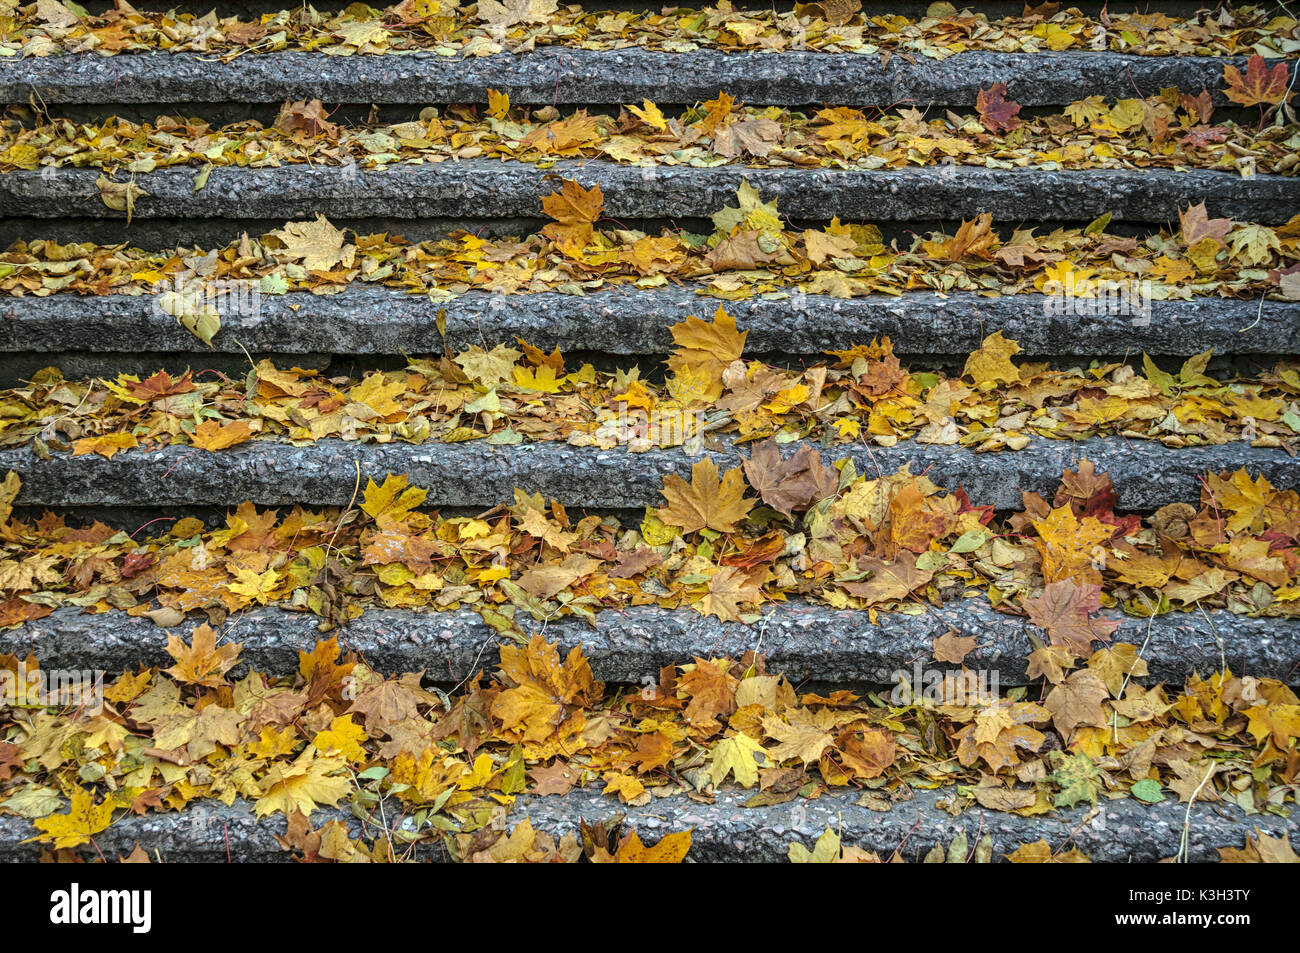 Natural Science, Stair in the old park in autumn Stock Photo